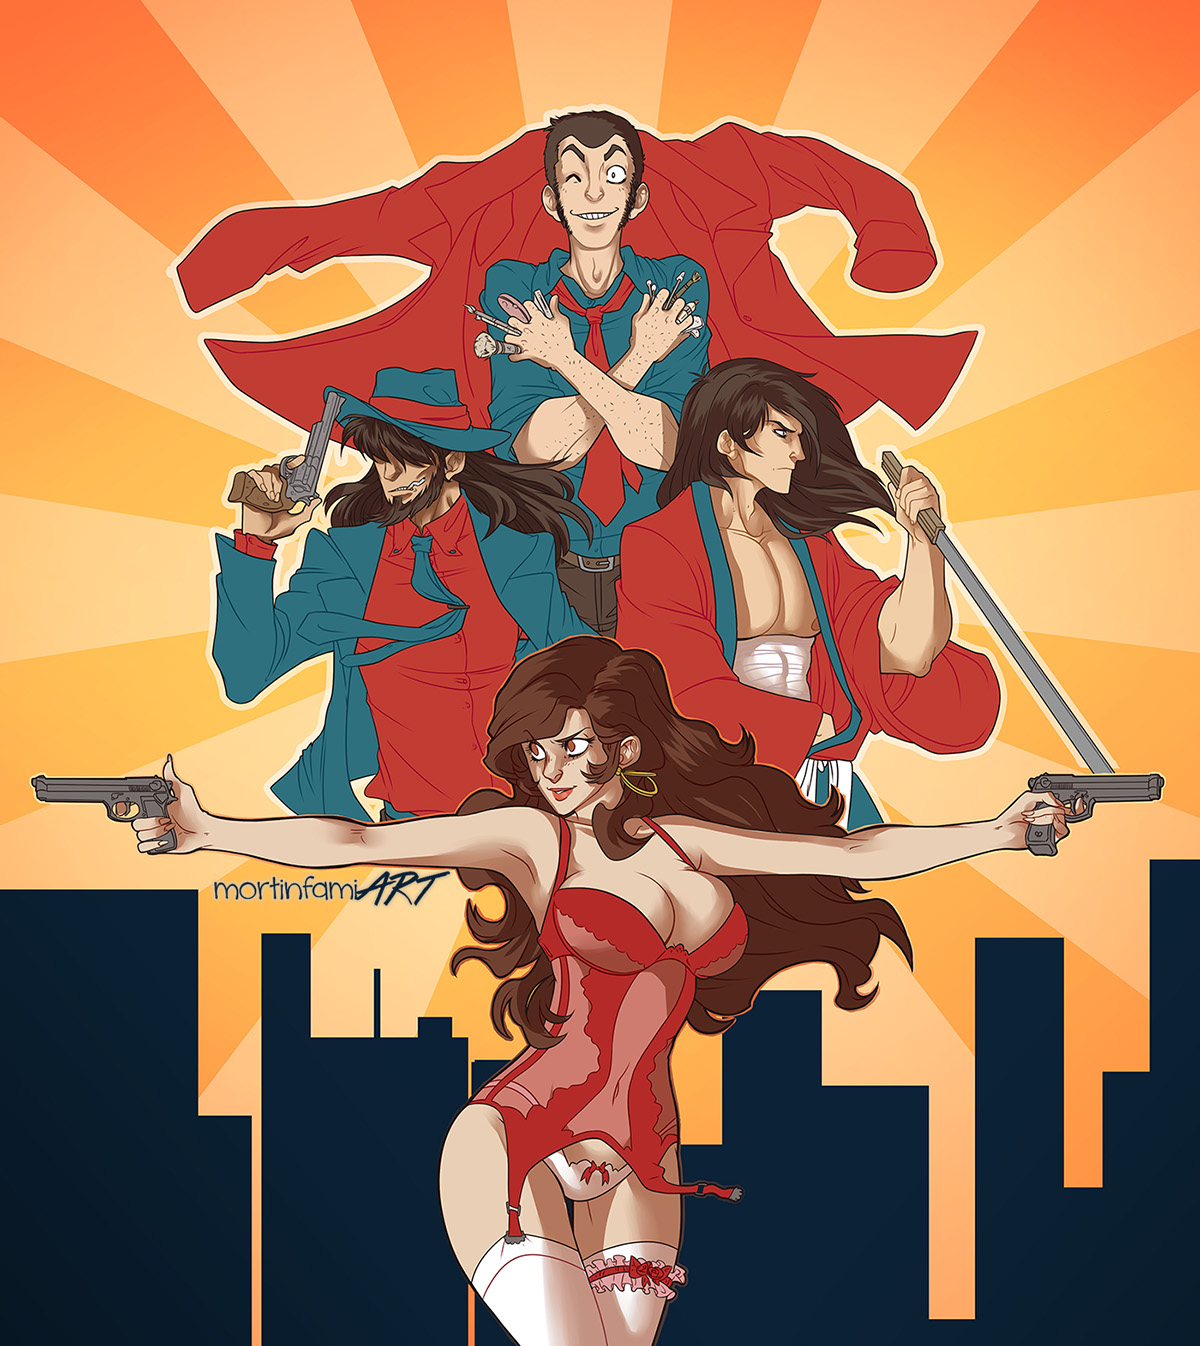 Lupin The Third By Mortinfamiart